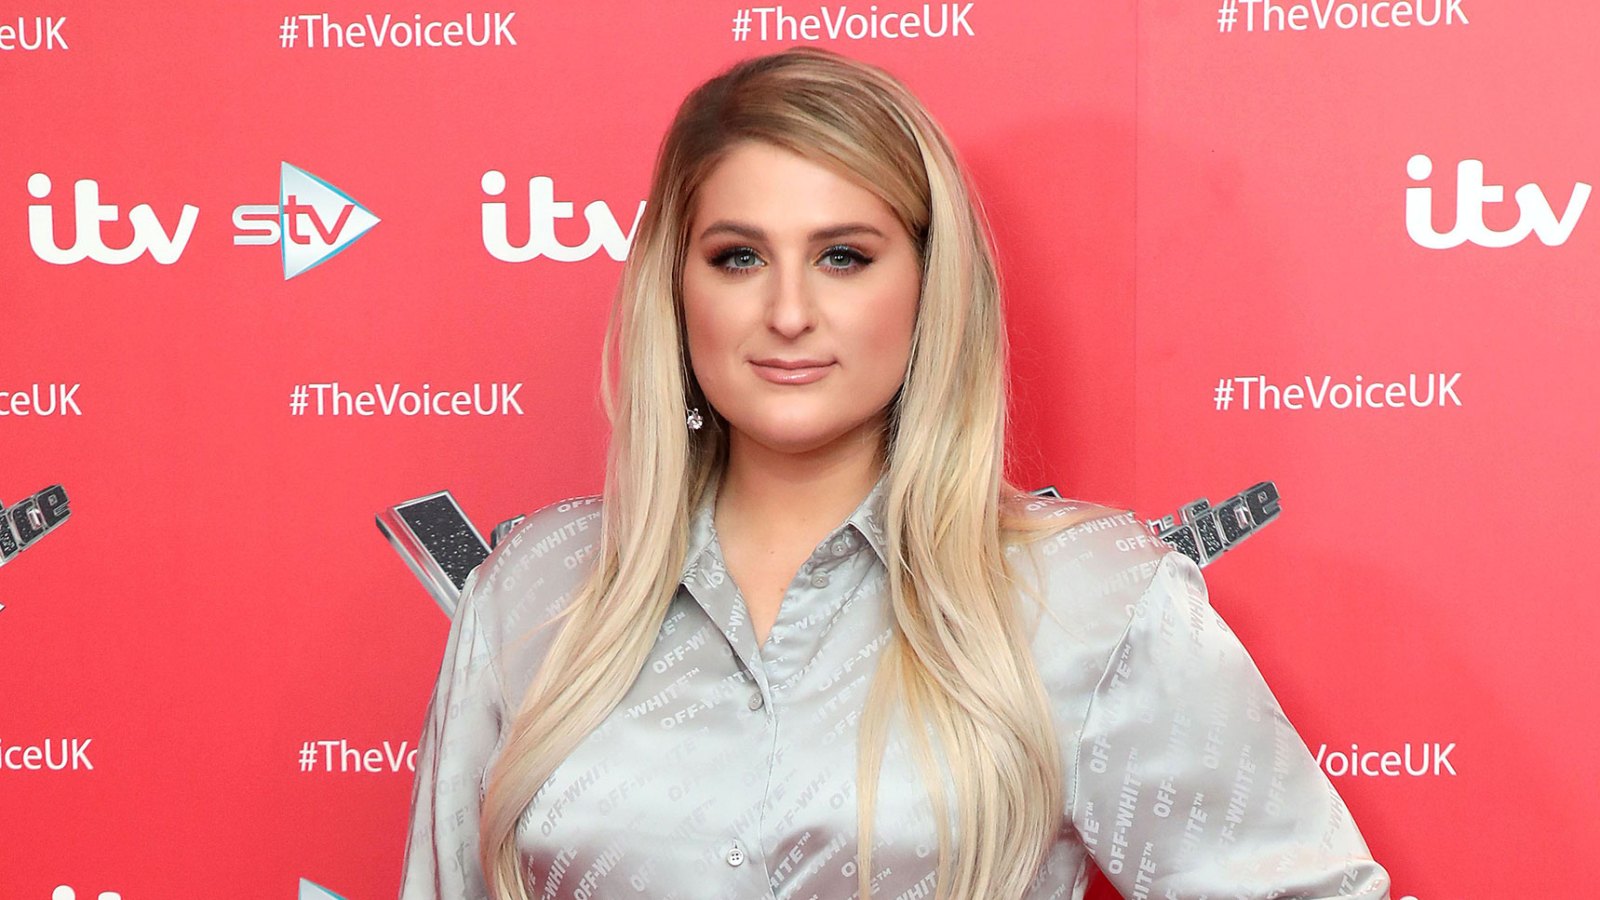 Meghan Trainor's Made You Look: How a TikTok trend quickly hit 1